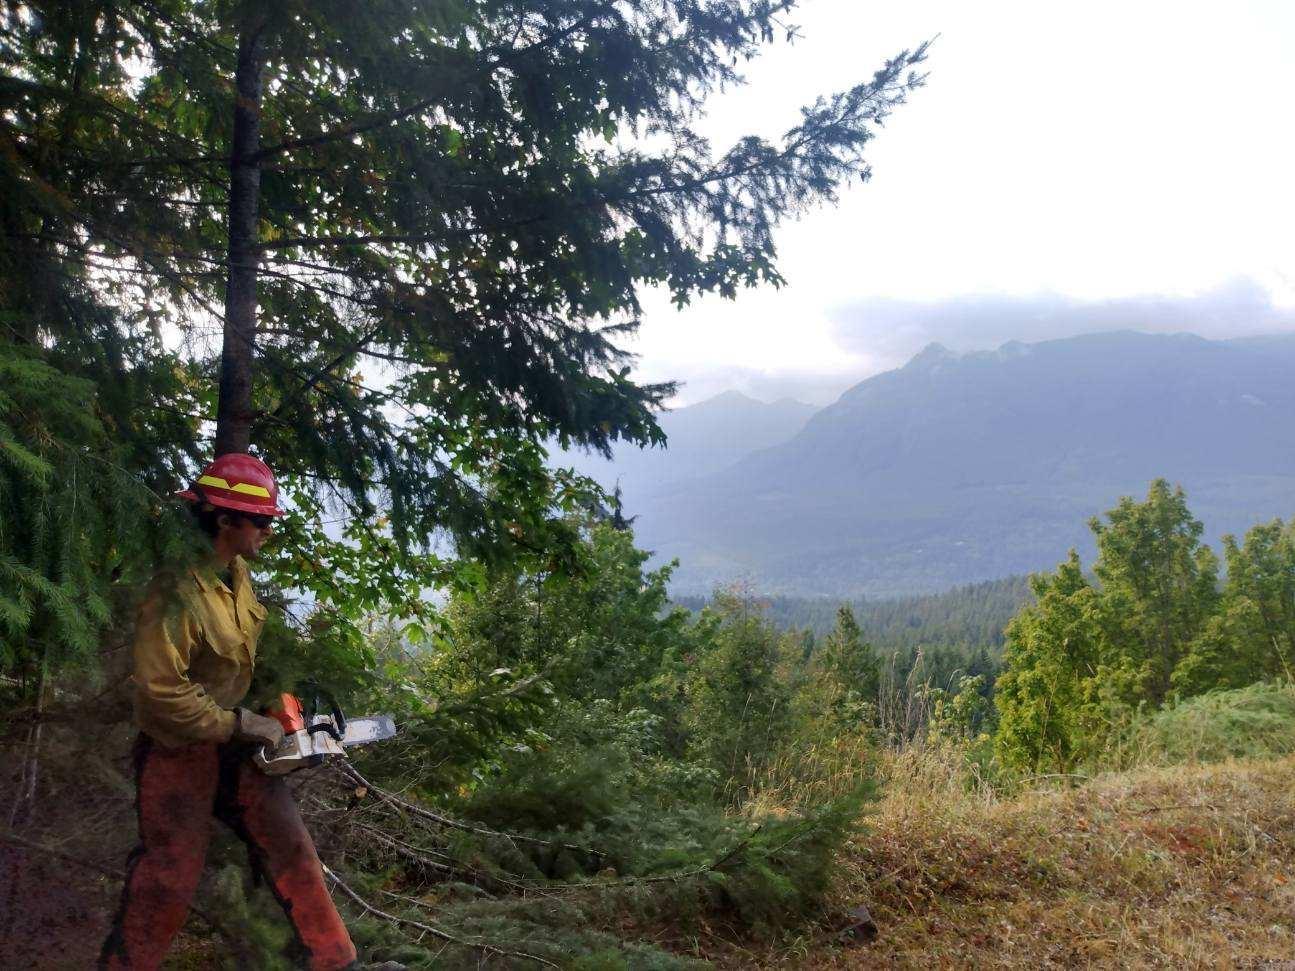 A man with a chainsaw is standing by a young tree, where he has cut off some of the lower branches to reduce the chance of it burning. In the background, clouds hang over the steep, forested mountains.